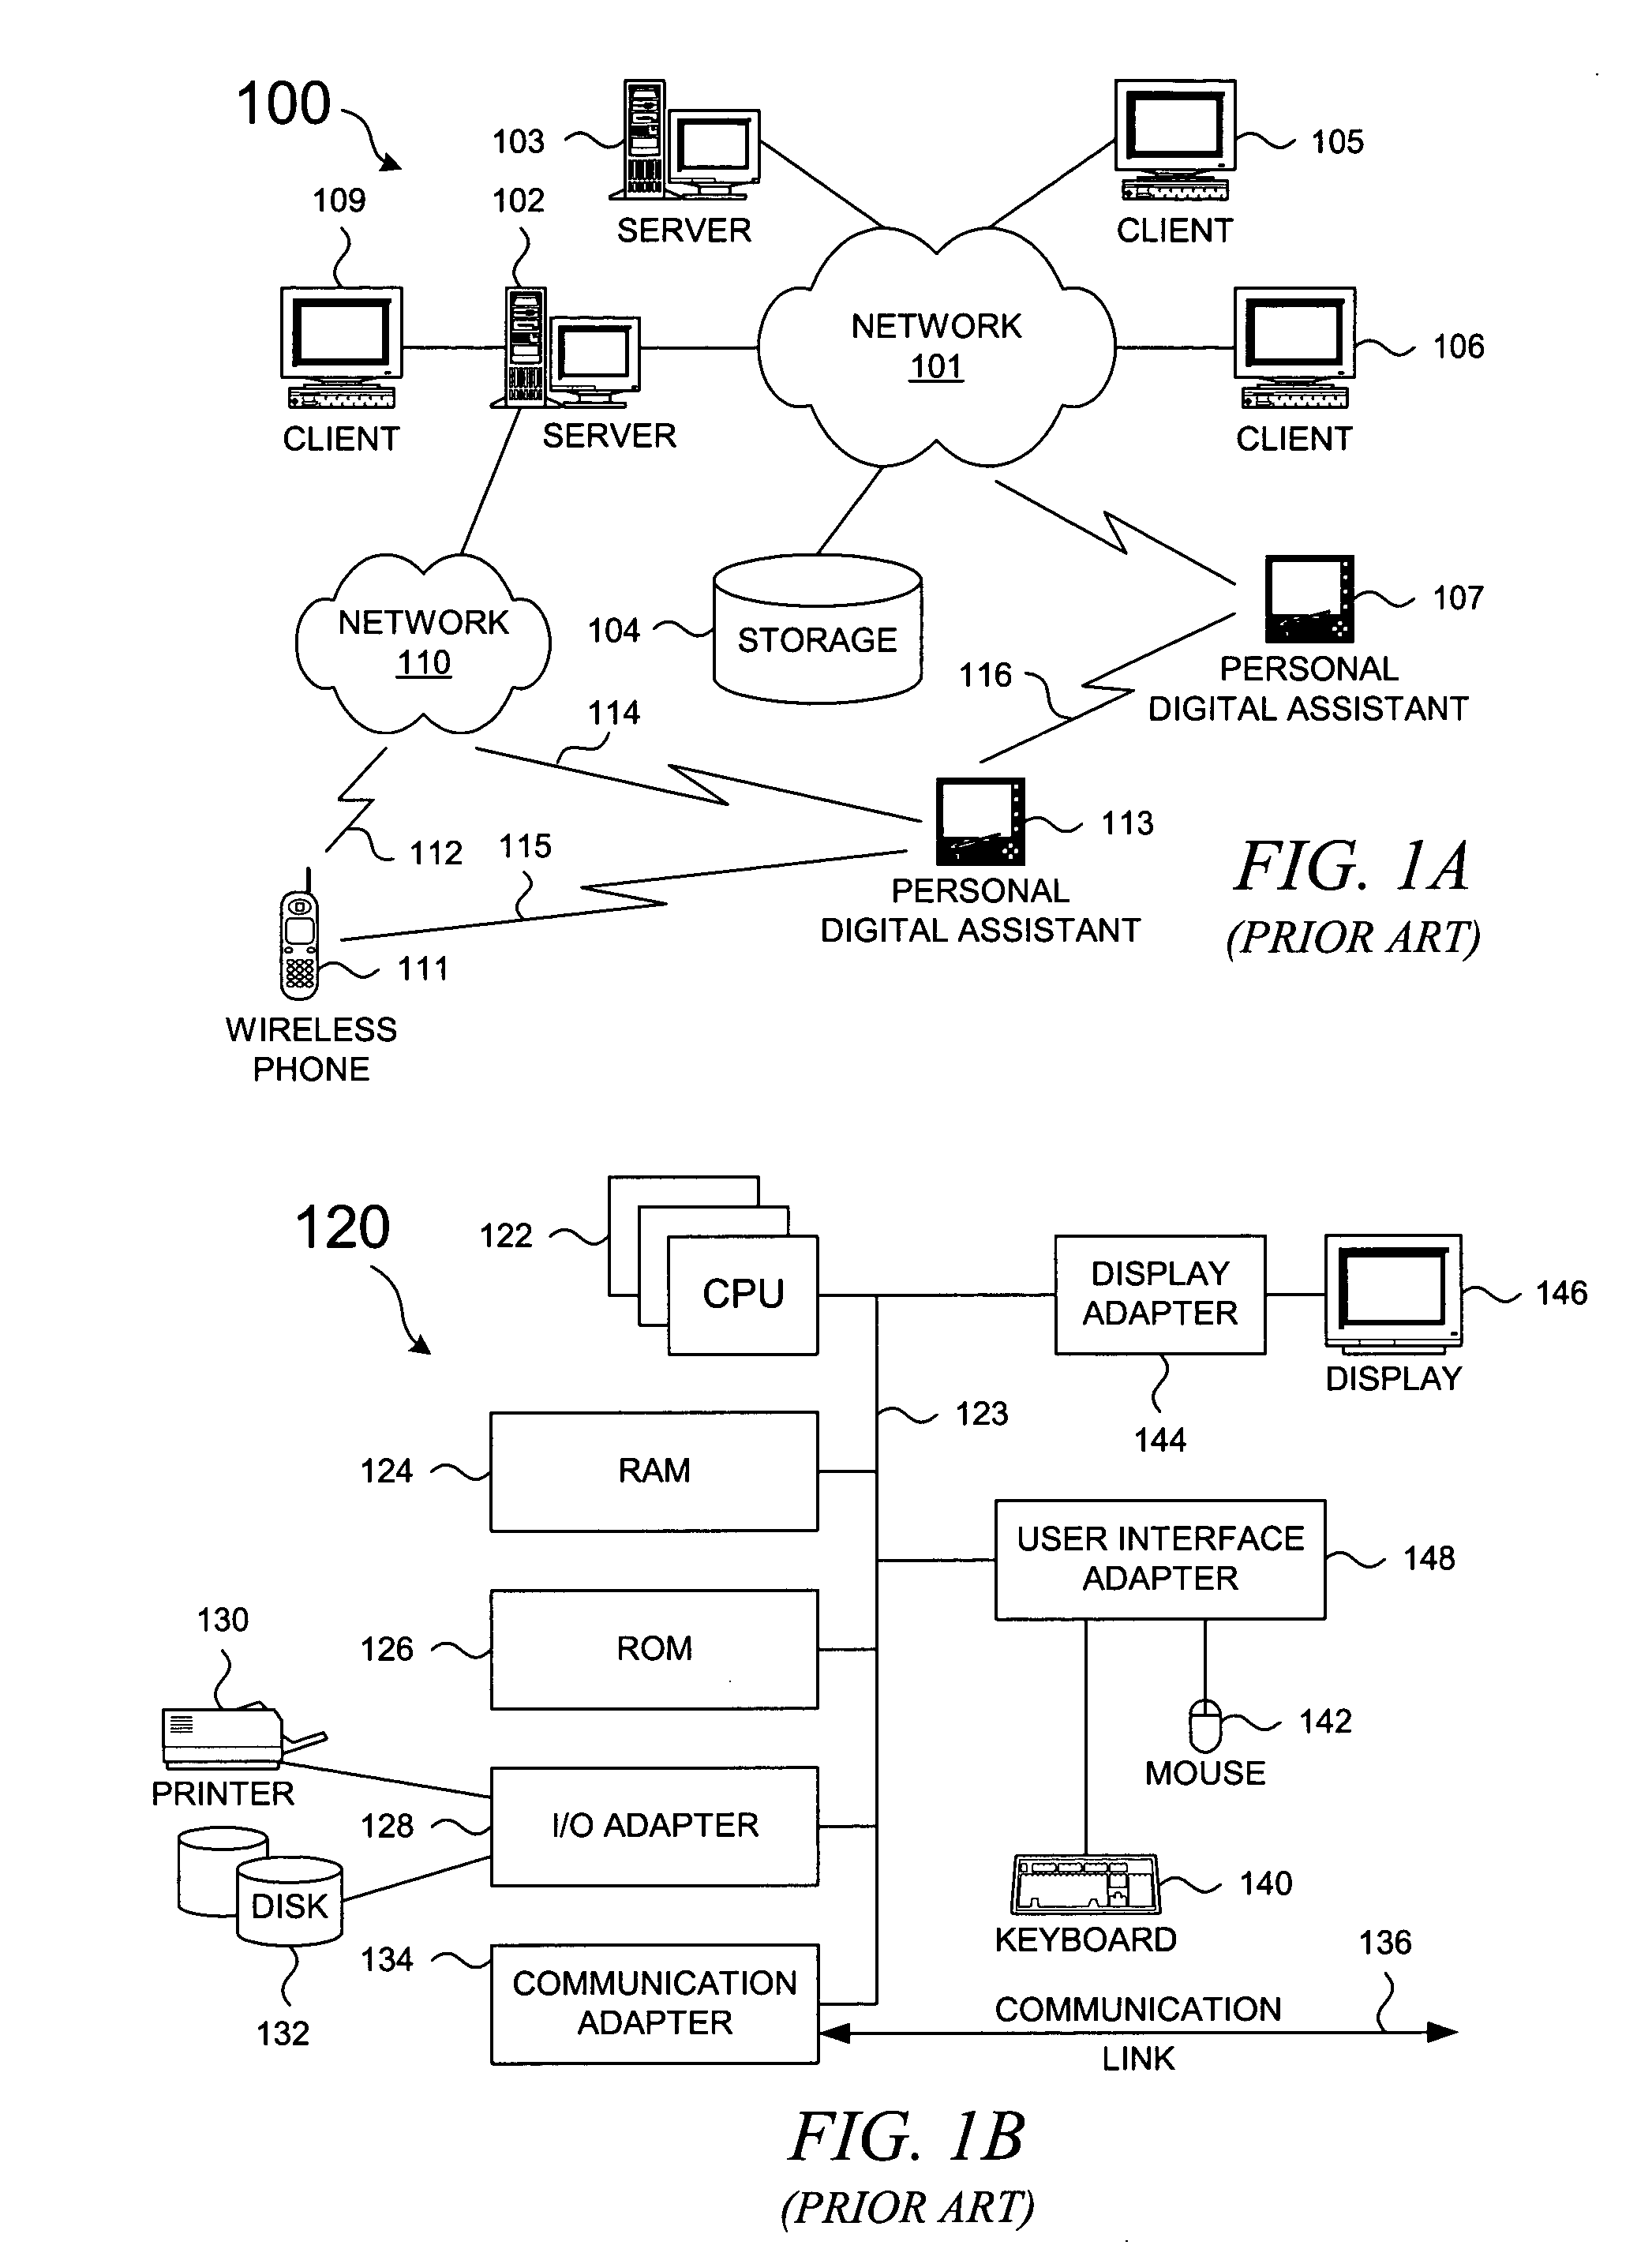 Method and system for maintaining consistency during multi-threaded processing of LDIF data